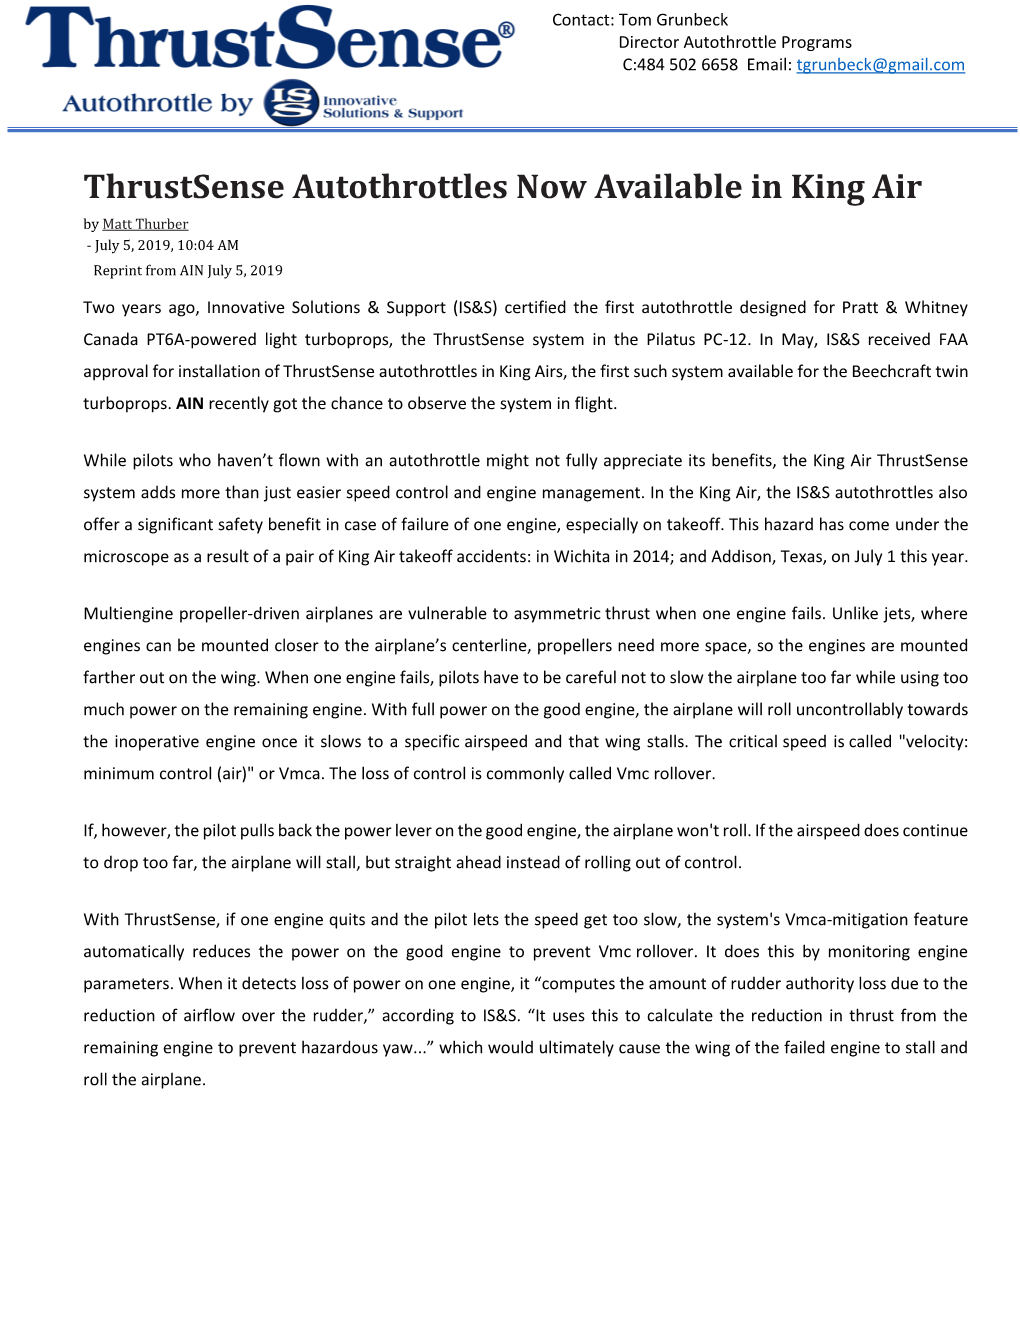 Thrustsense Autothrottles Now Available in King Air by Matt Thurber - July 5, 2019, 10:04 AM Reprint from AIN July 5, 2019